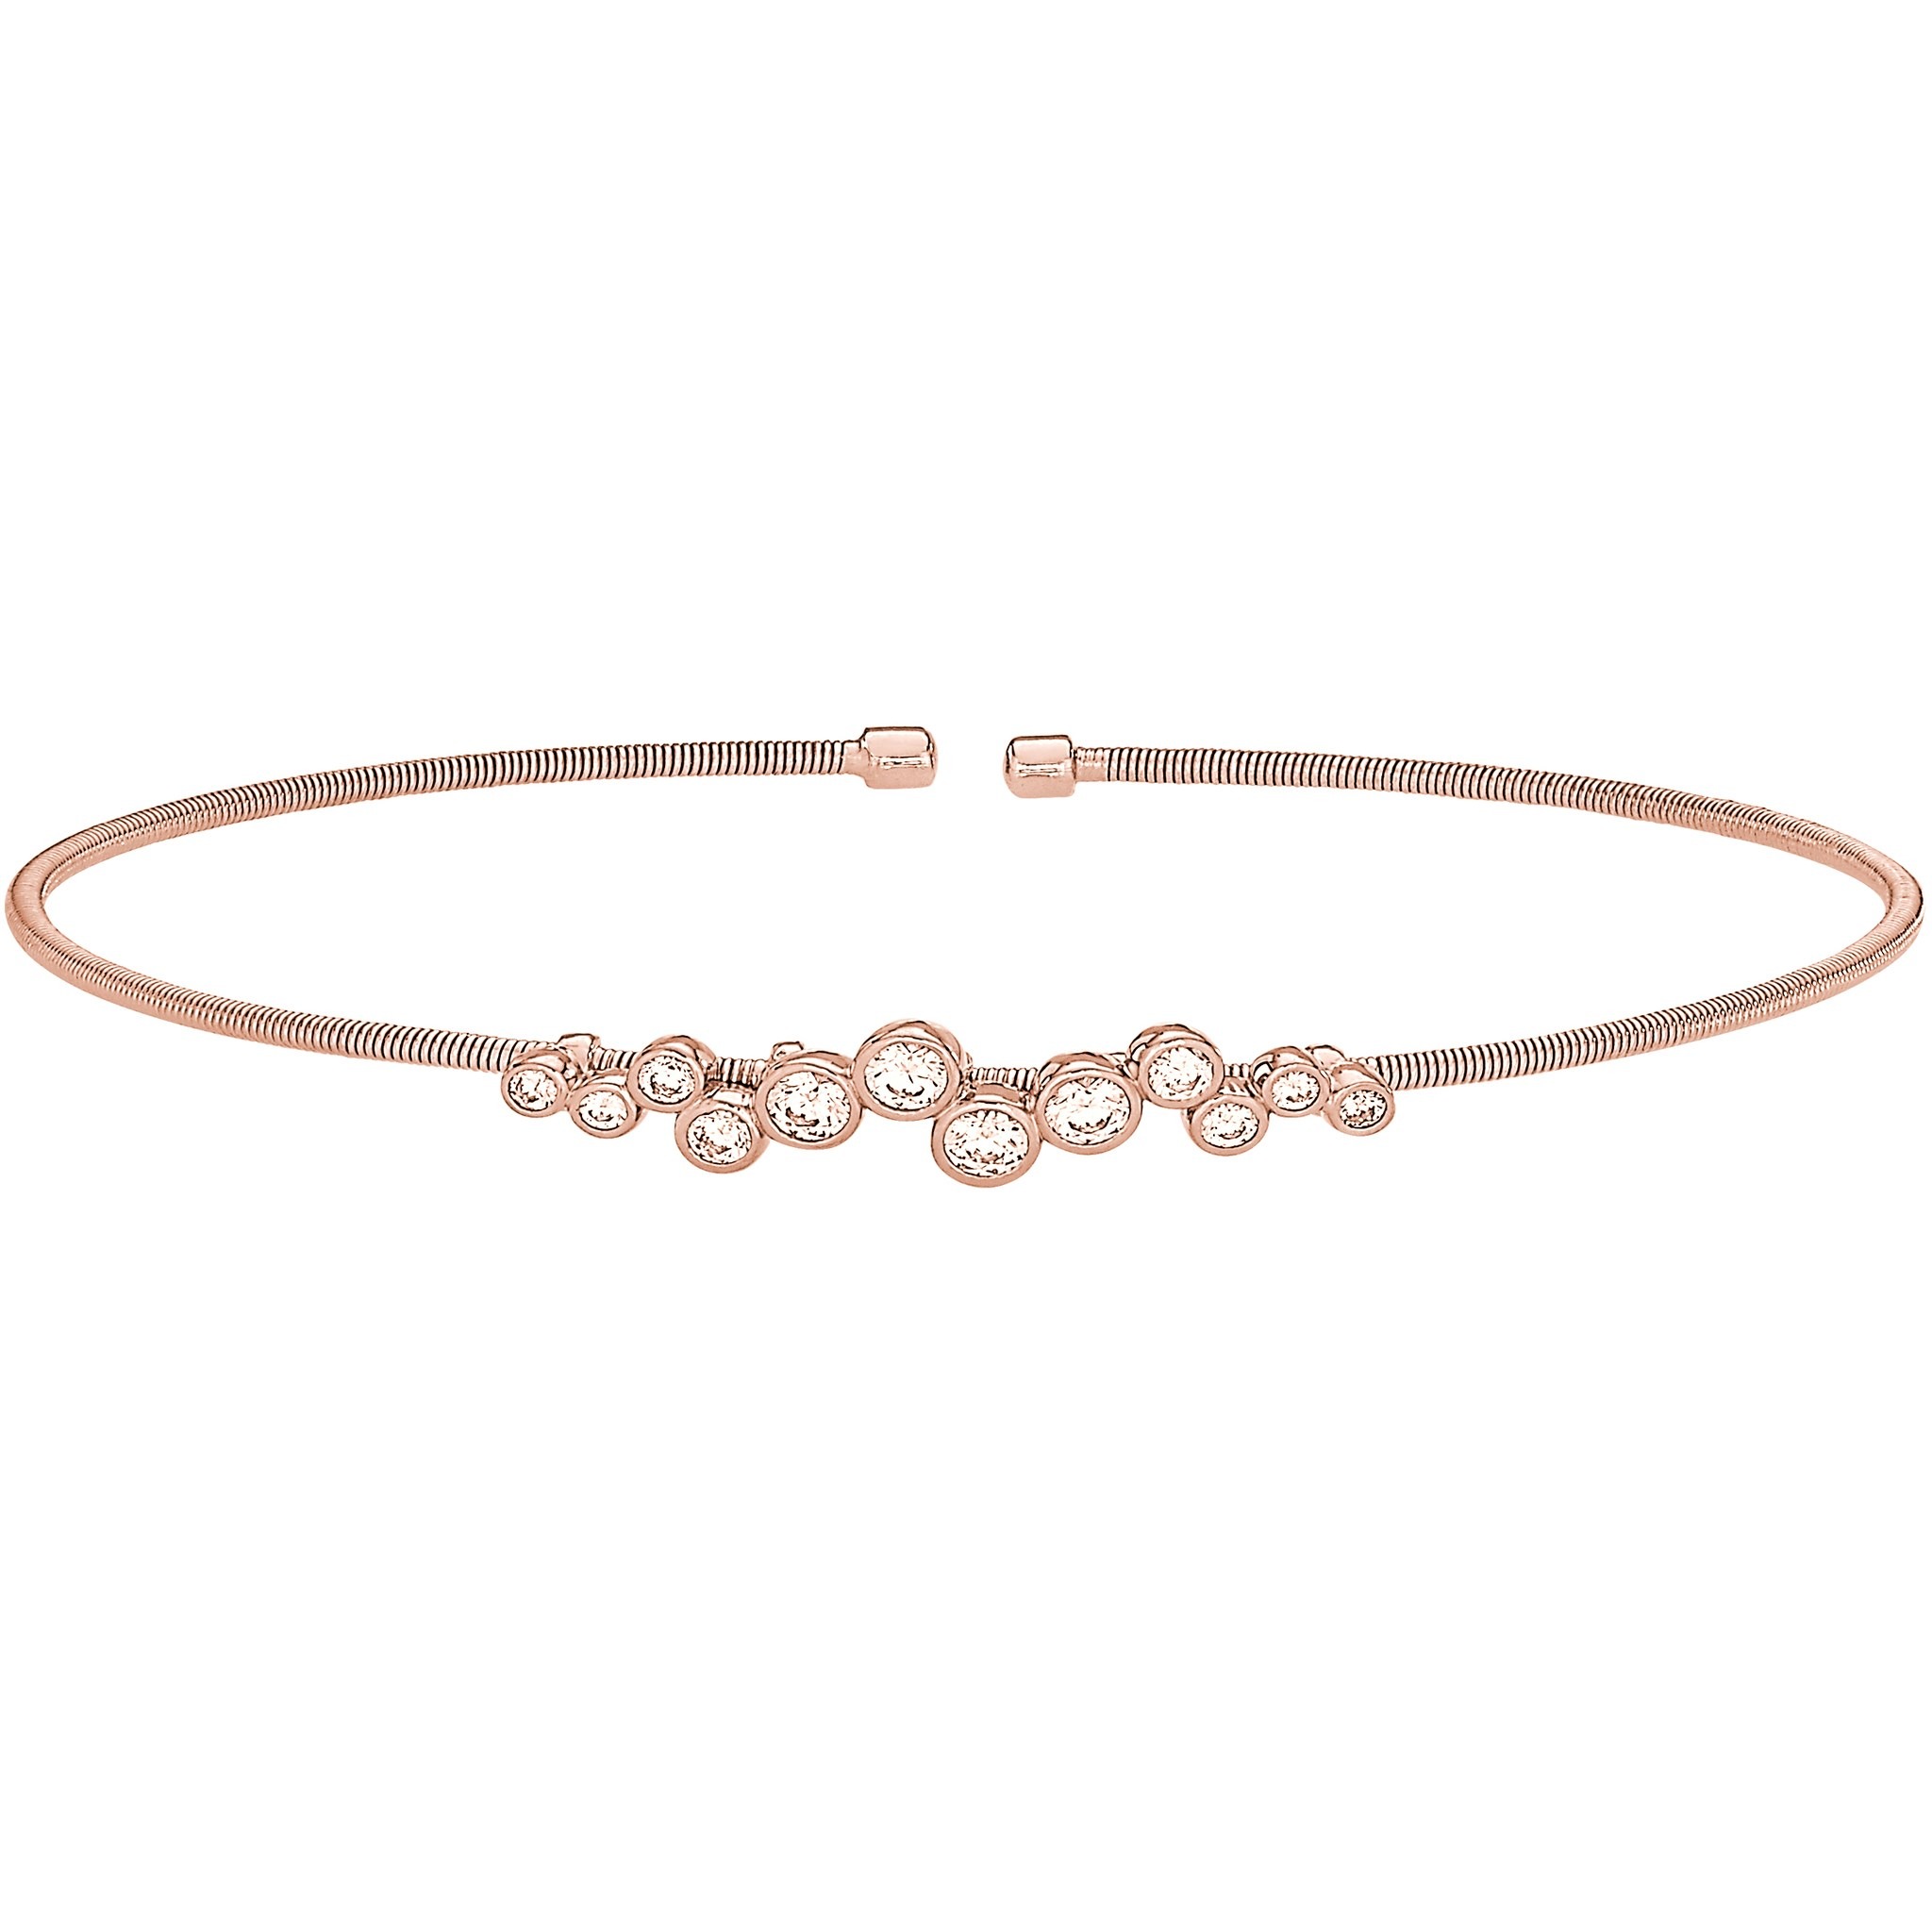 Rose Gold Finish Sterling Silver Cable Cuff Bracelet with Bubble Pattern